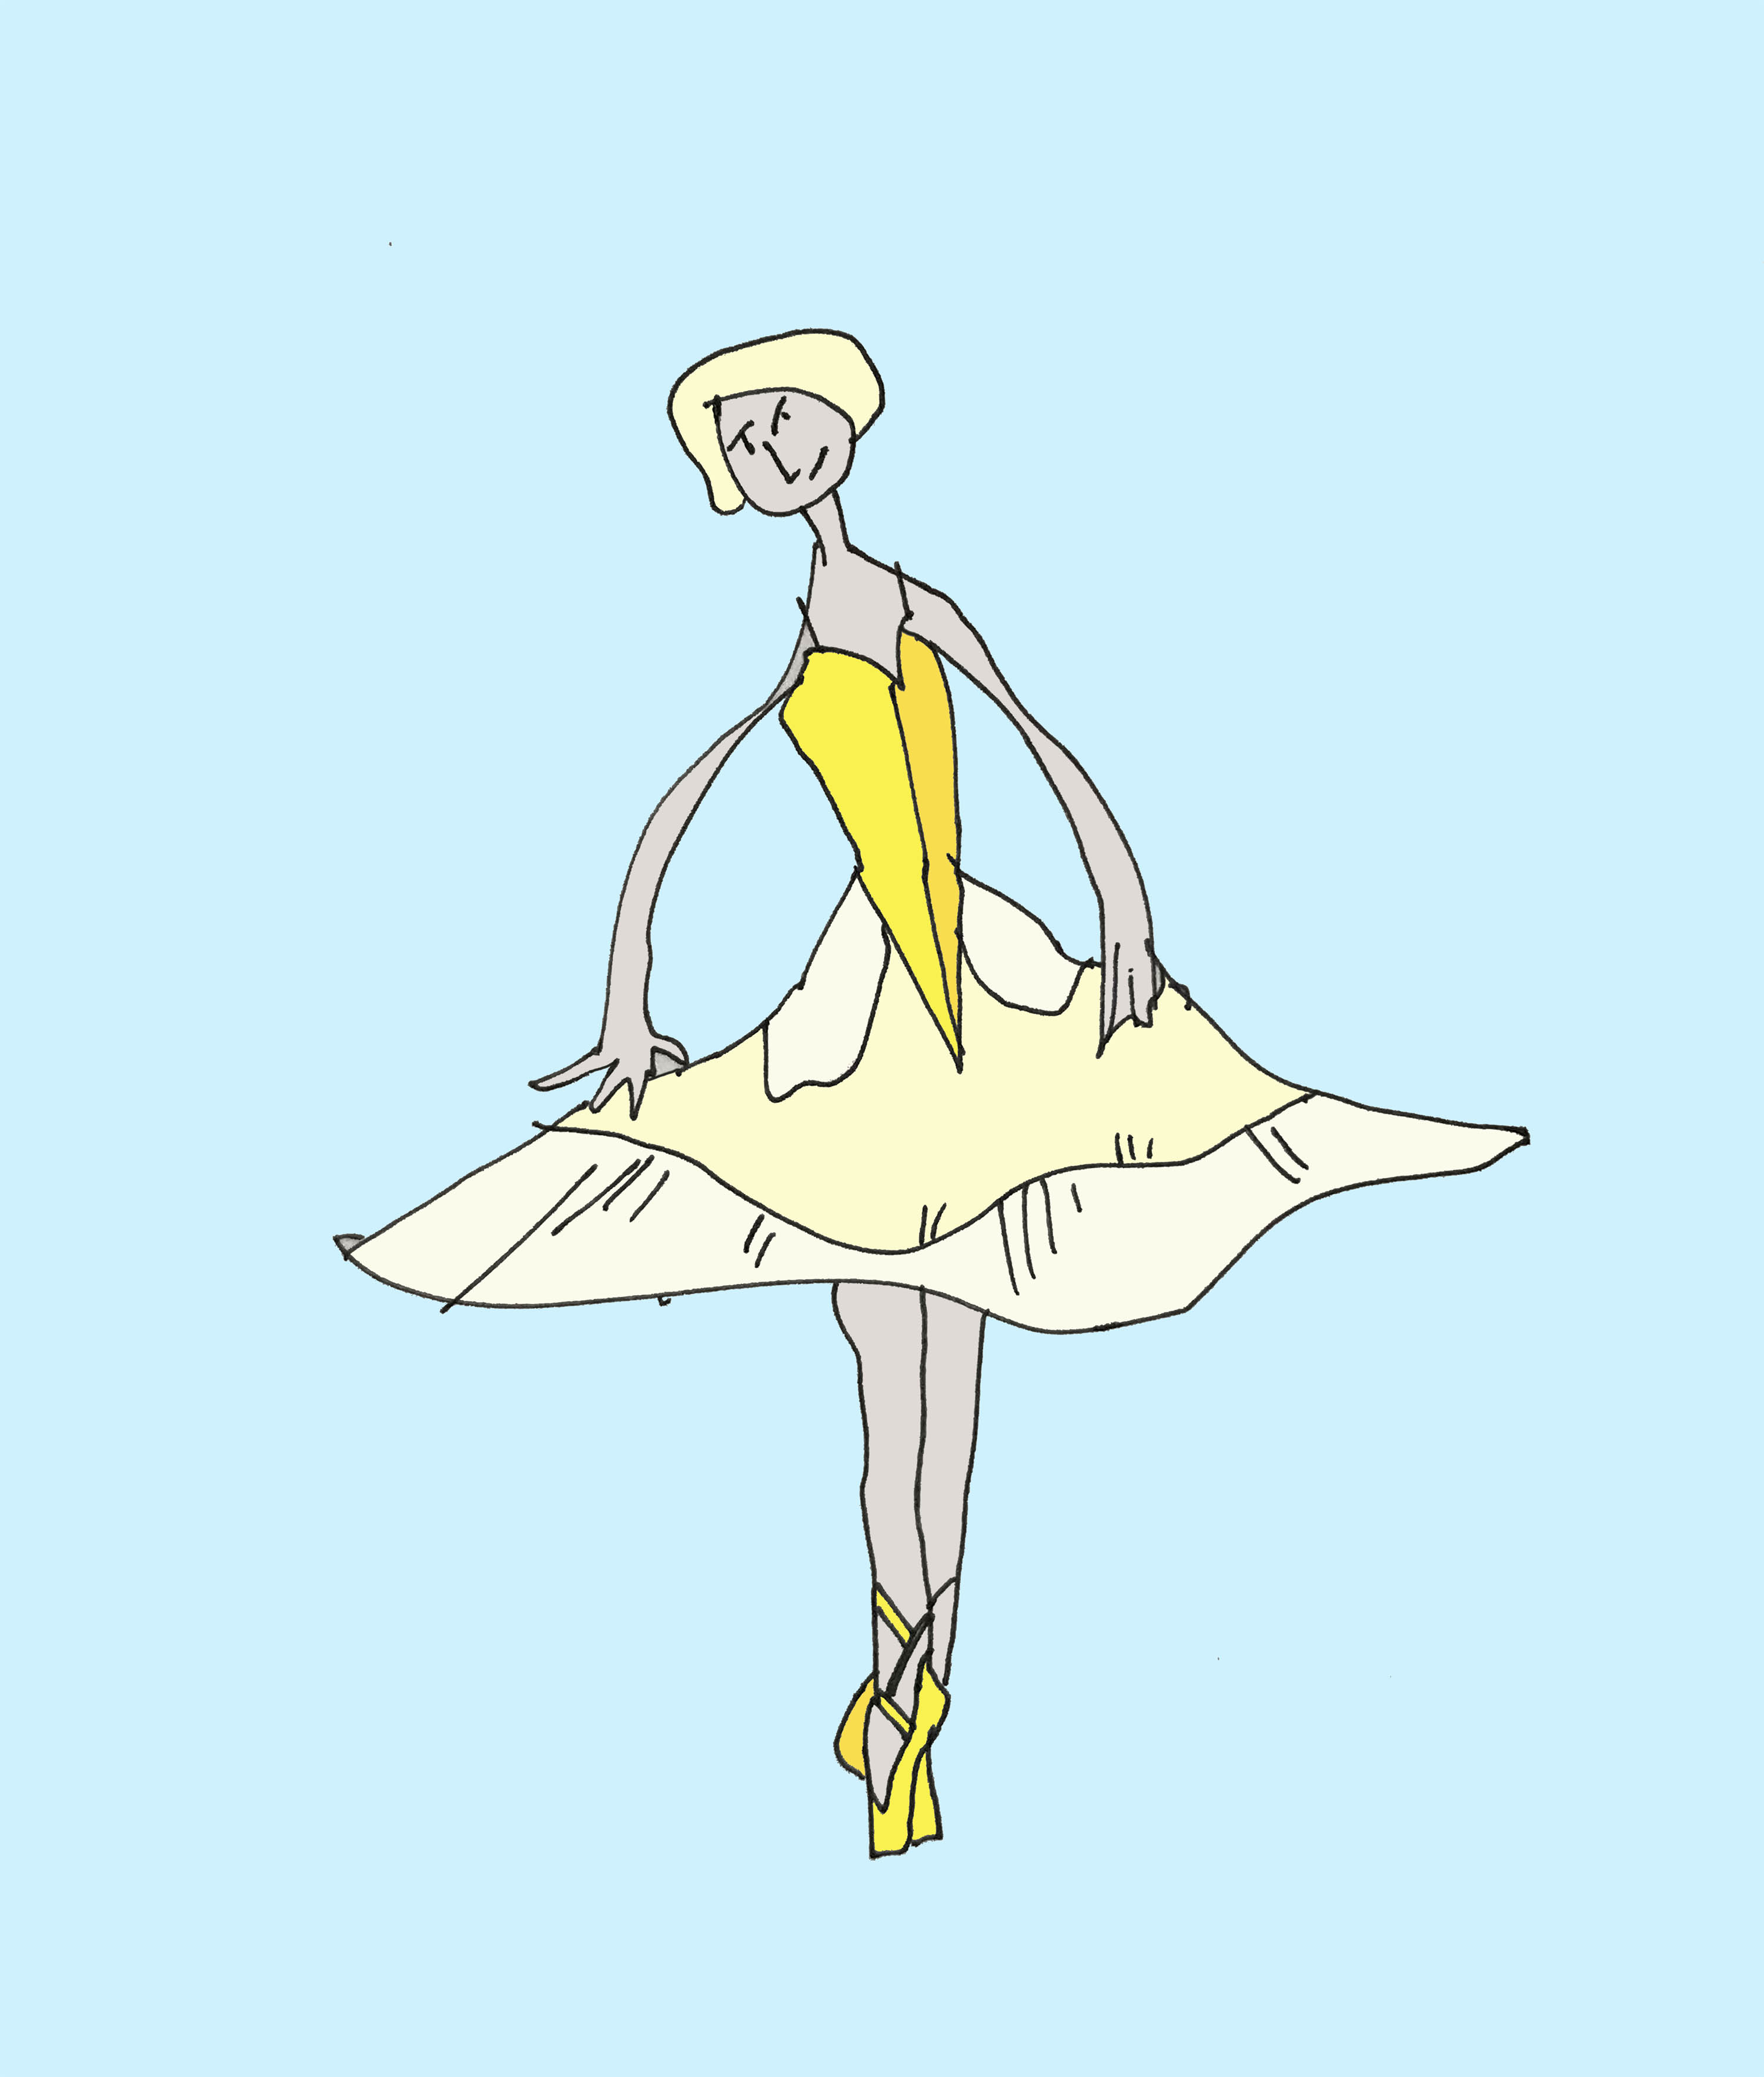 art every day number 203 / sketch / tutu